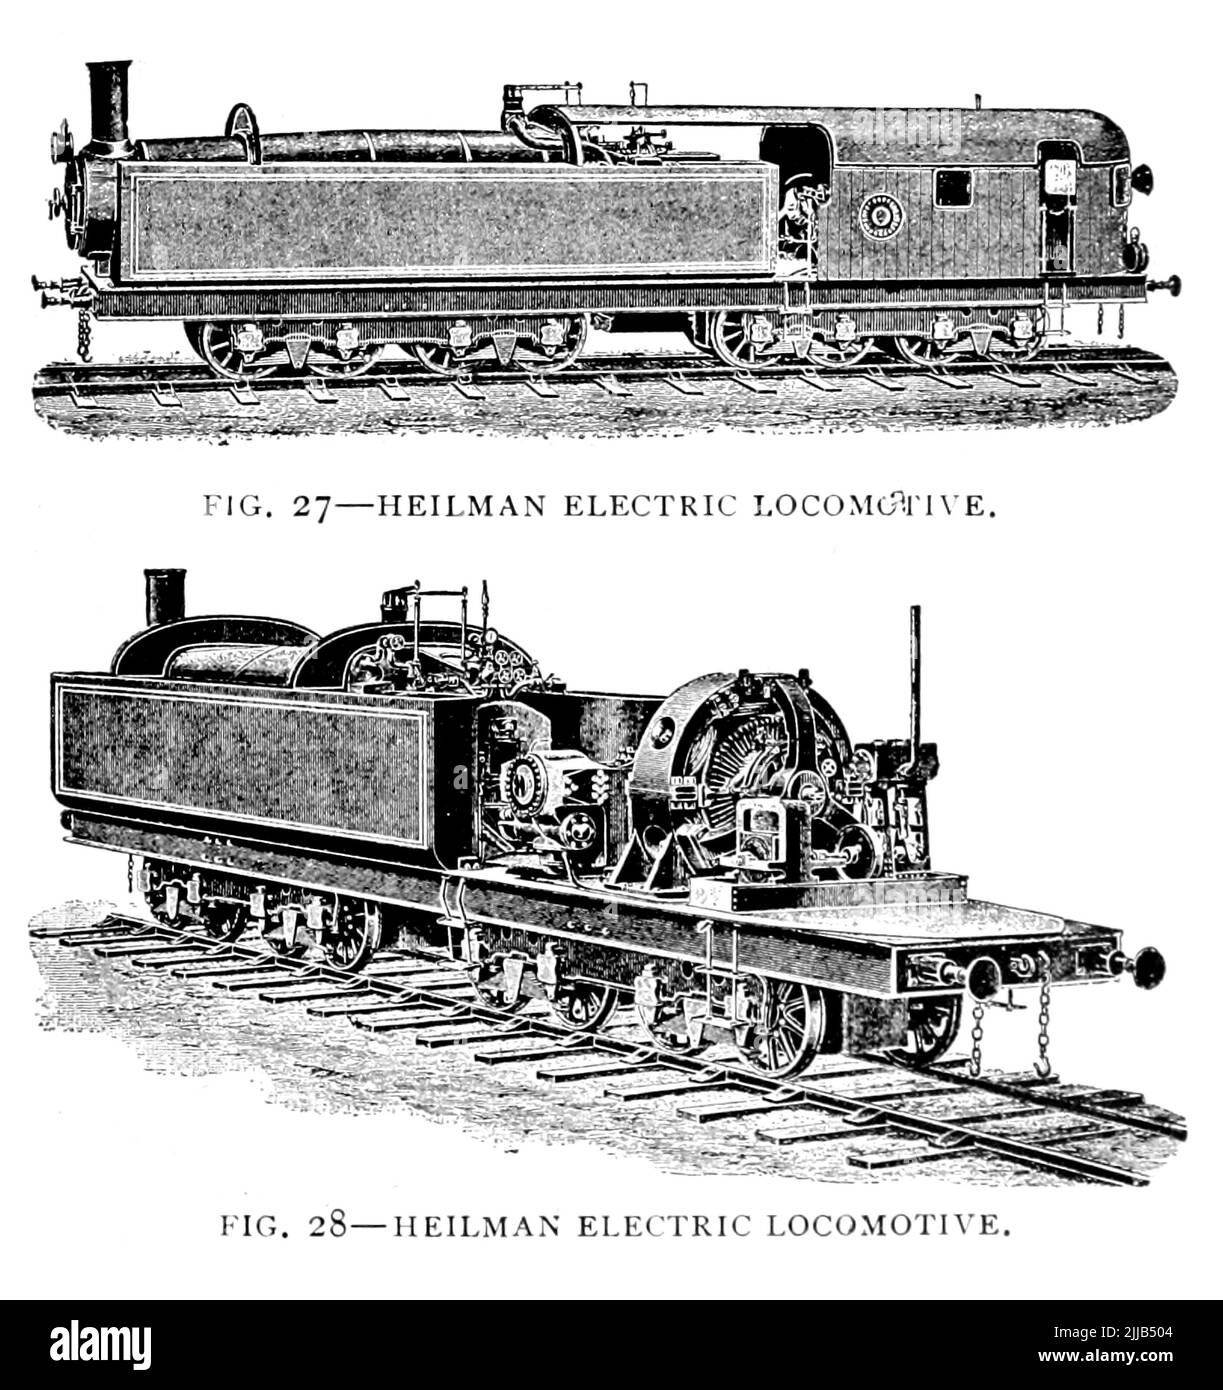 Heilman Electric Locomotive from the article ' DEVELOPMENT OF THE ELECTRIC LOCOMOTIVE ' By B. J. Arnold, M. Am. Inst. E. E. from The Engineering Magazine DEVOTED TO INDUSTRIAL PROGRESS Volume VII April to September, 1894 NEW YORK The Engineering Magazine Co Stock Photo